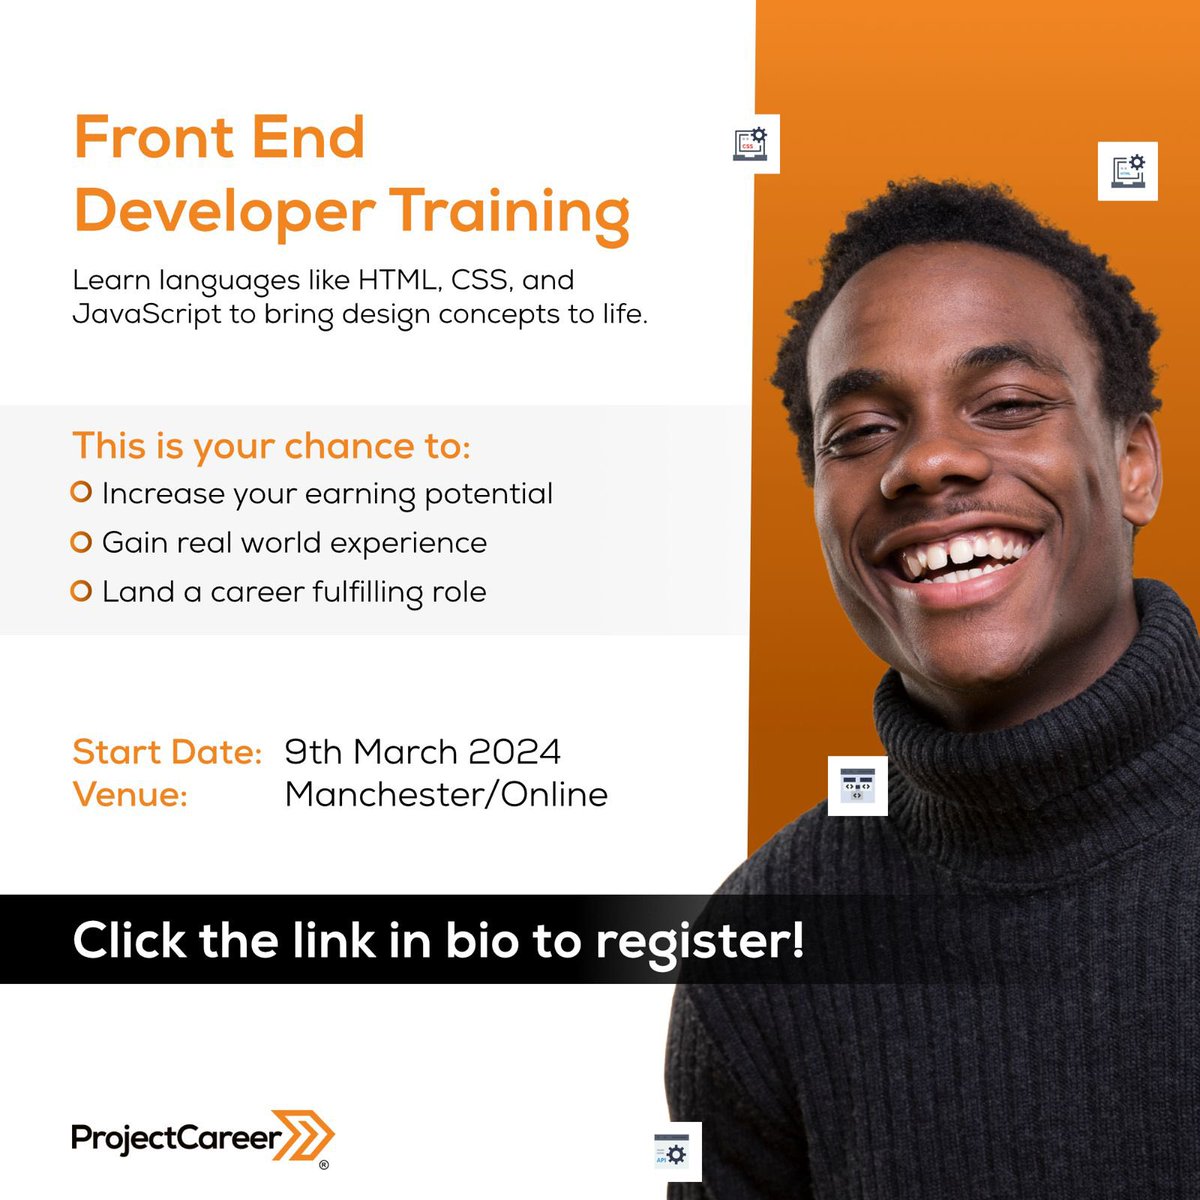 Unlock the world of Front End Developer Training! 
Join us starting March 9th in Manchester or online. Click the link in bio to register now! 💻💡 #FrontEndDevelopment #HTML #CSS #JavaScript #CareerOpportunity #EarningPotential #RealWorldExperience #TechTraining